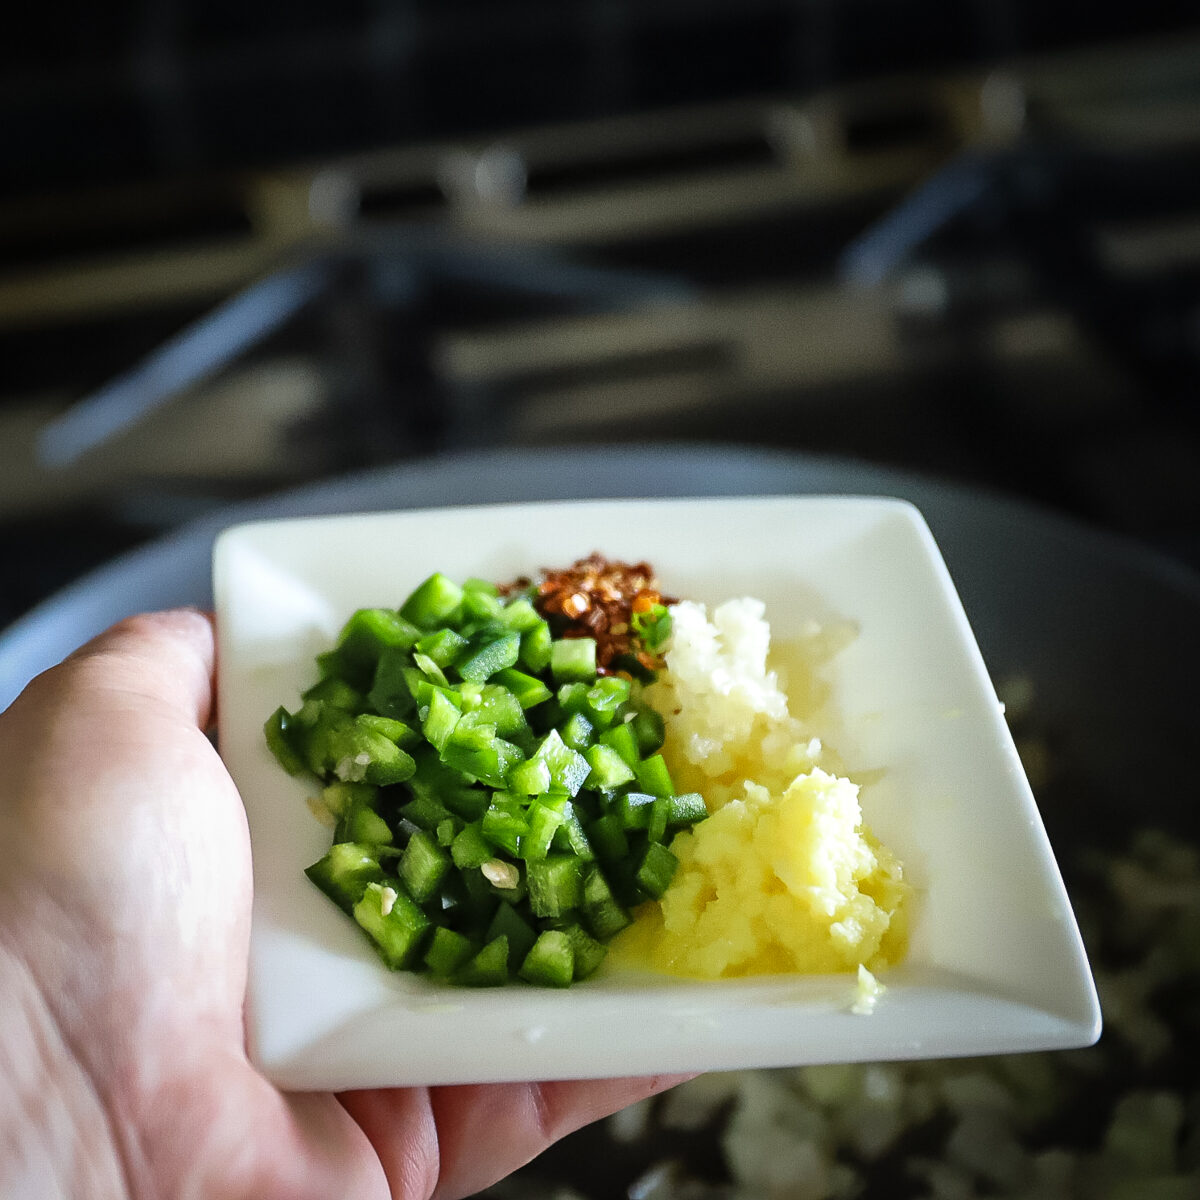 A small square plate holds minced garlic, ginger, chili flakes and diced jalapeno for the recipe.